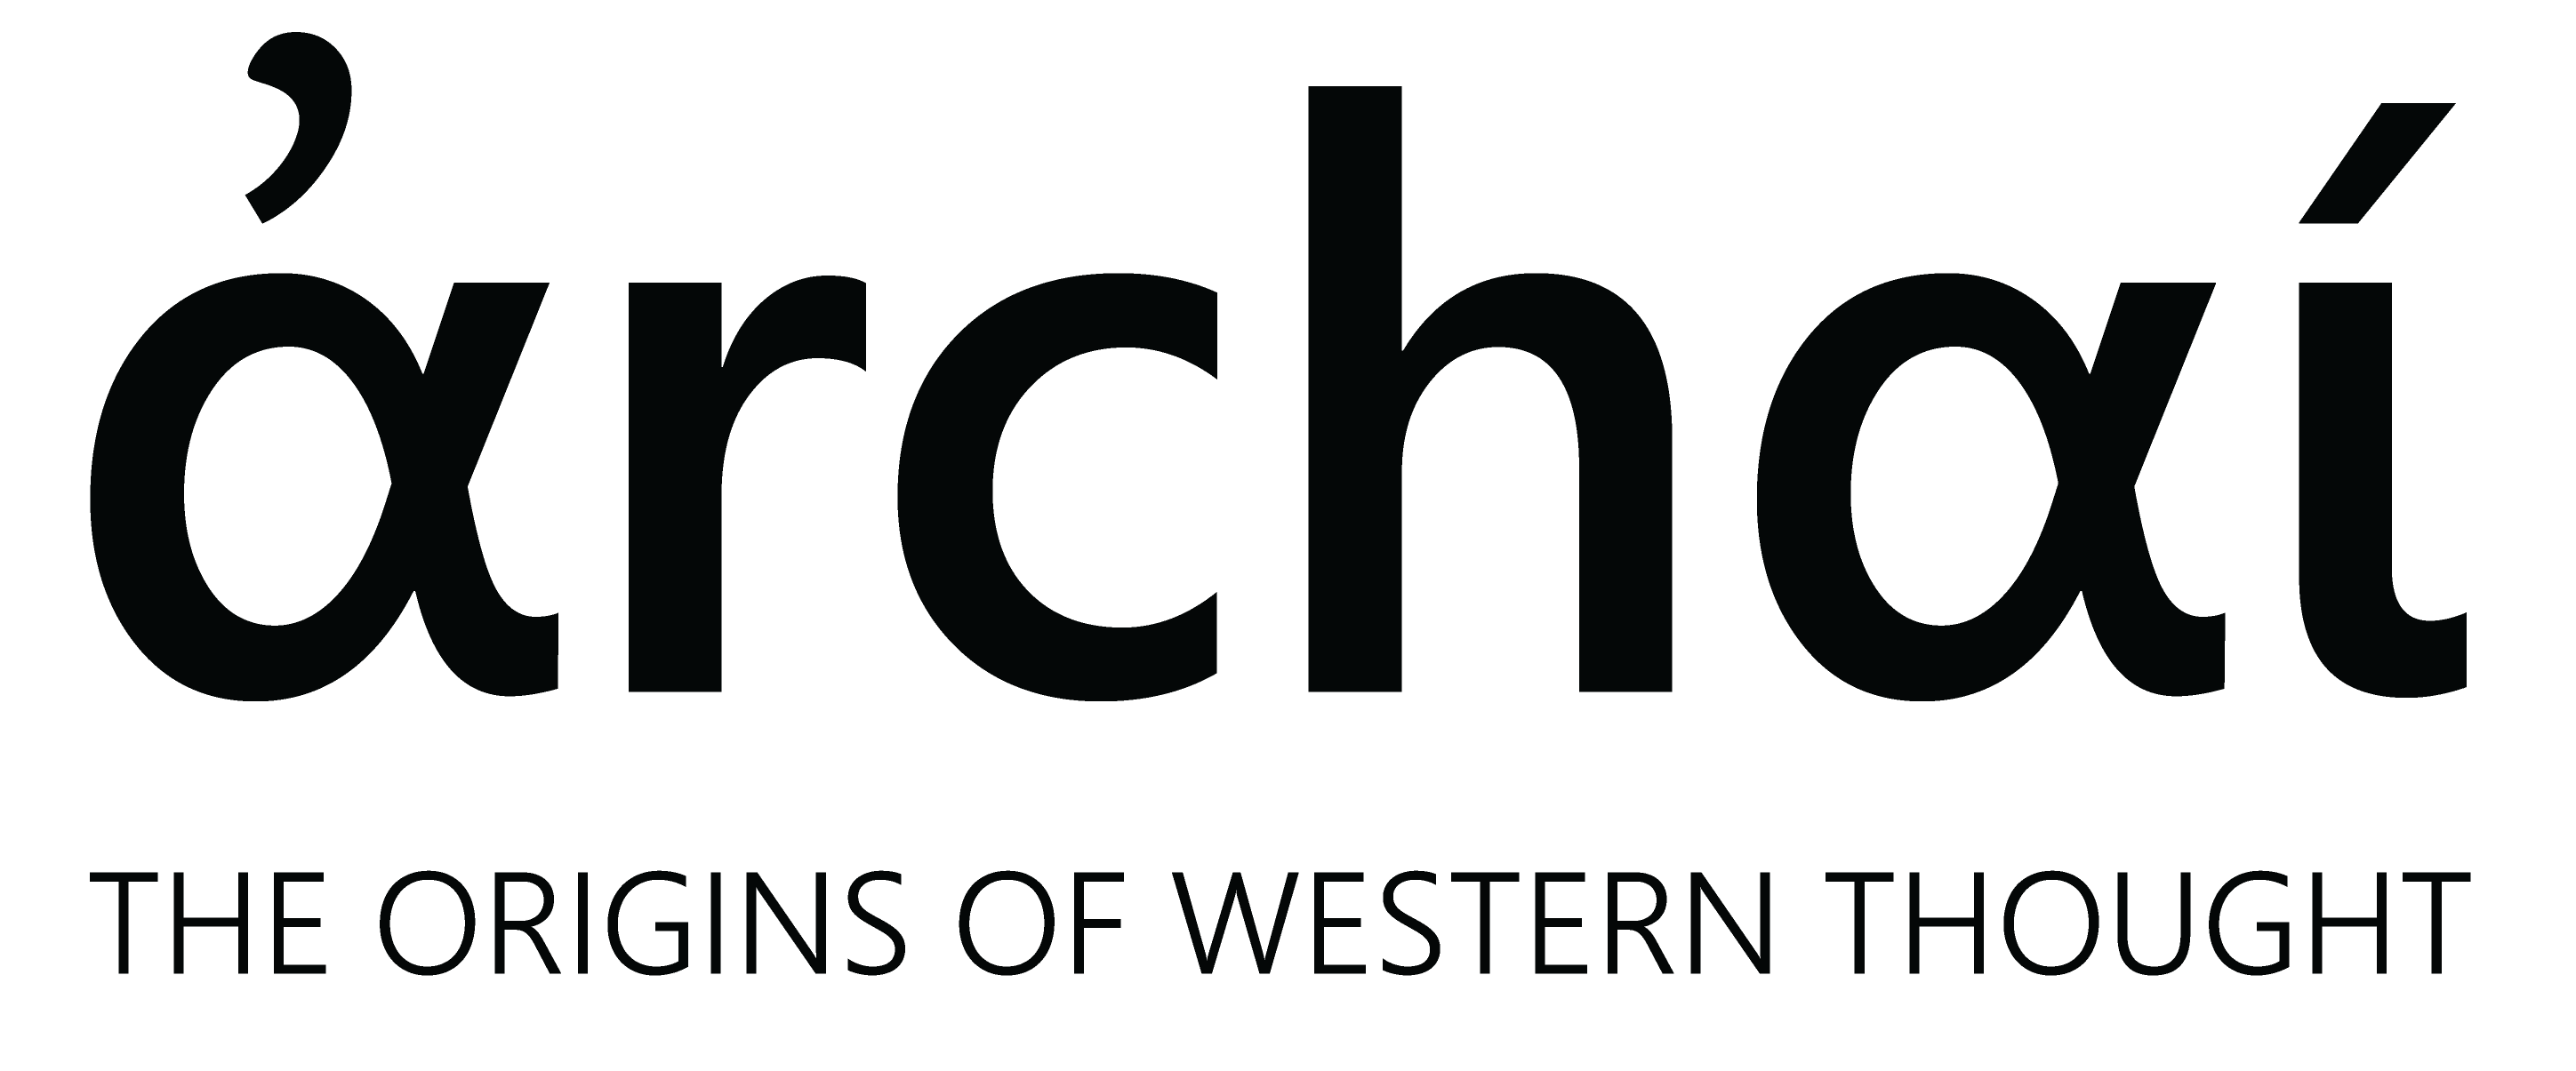 Archai Journal is seeking to appoint a new Editor for Science Communication